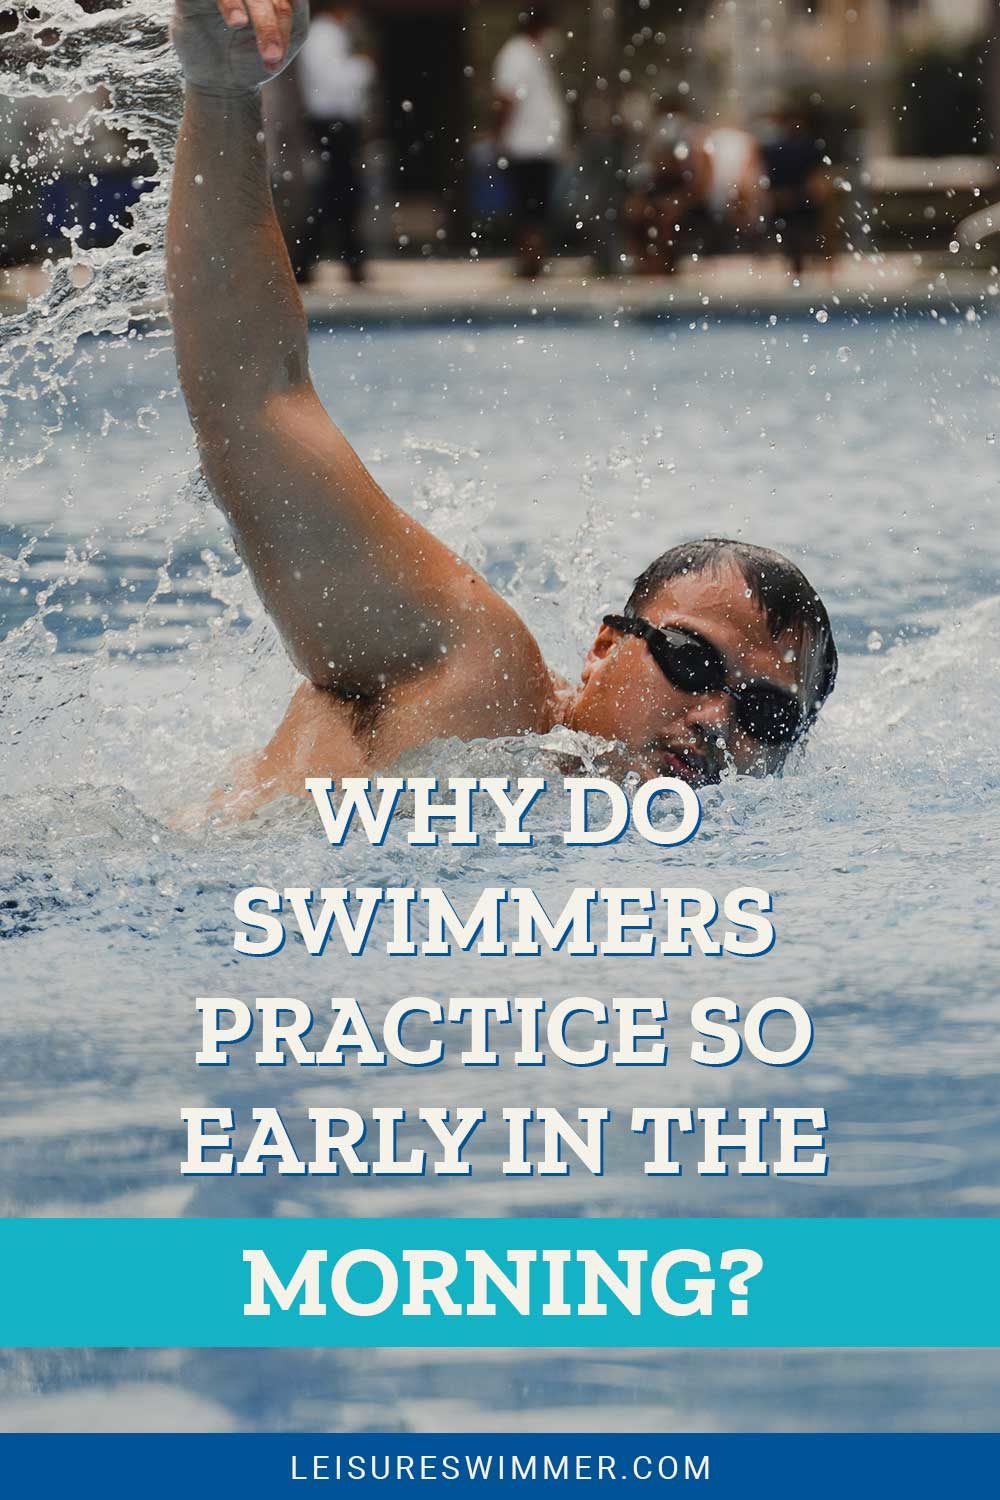 Man wearing swimming goggles in a pool - Why Do Swimmers Practice So Early In The Morning?